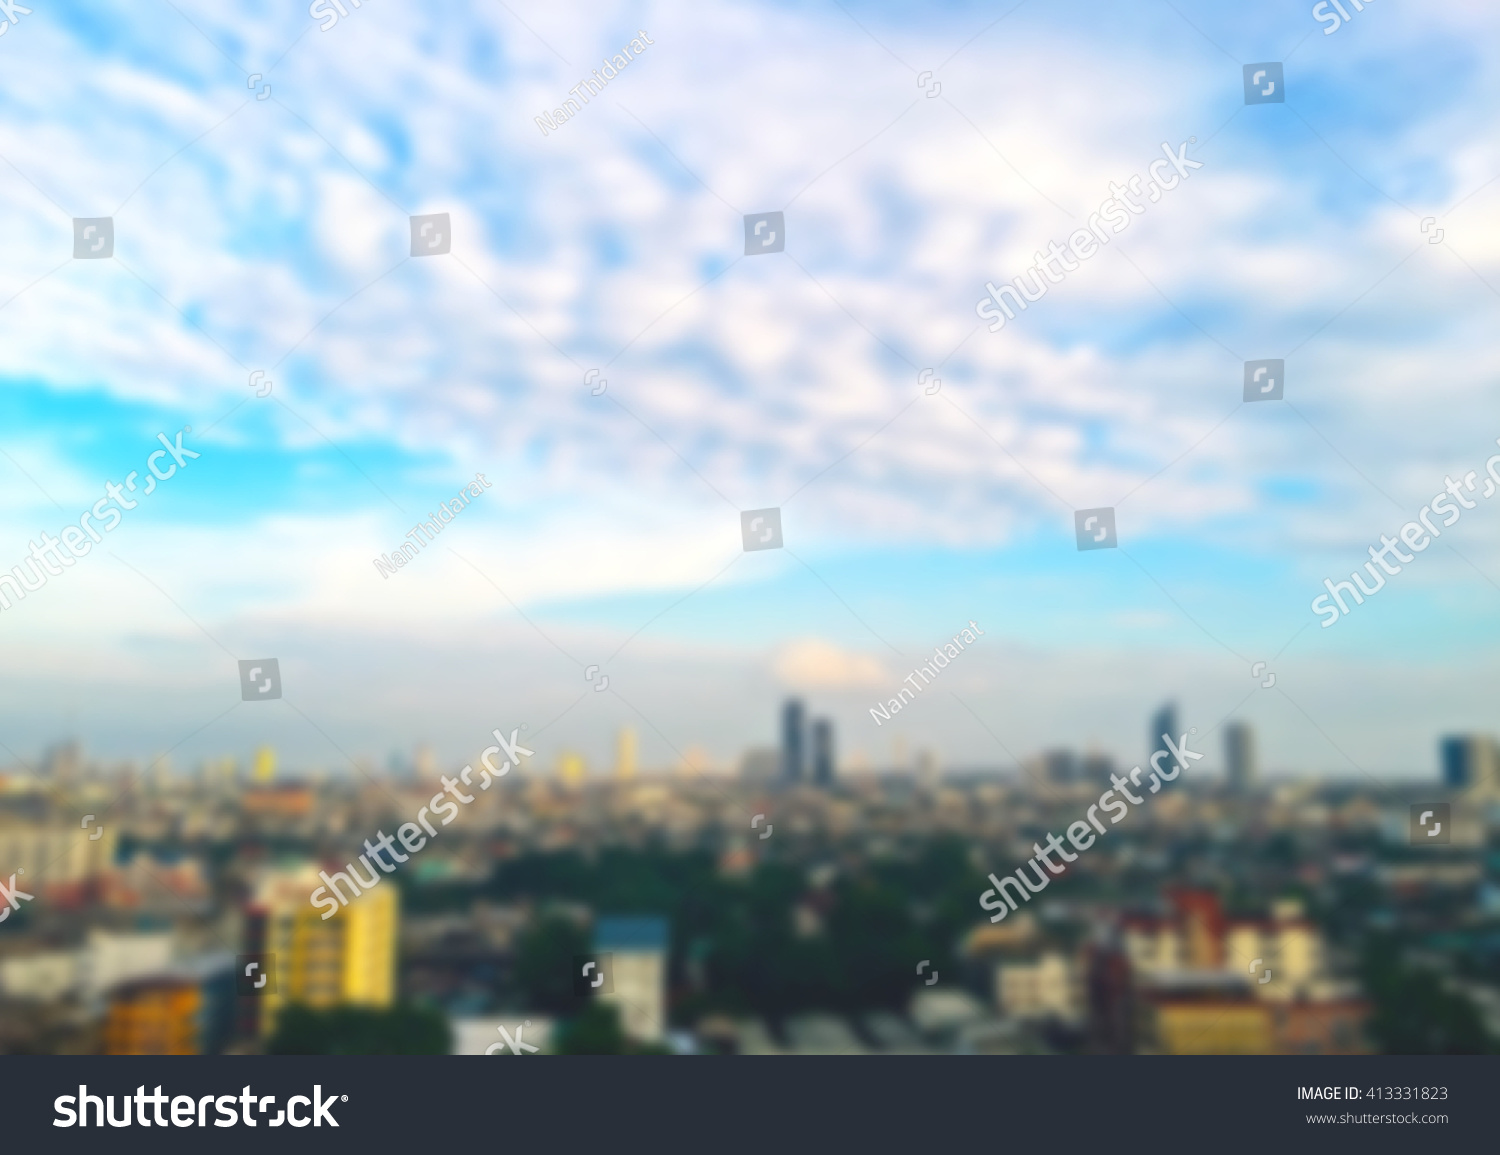 Blur image of the top view of the city of Bangkok, Thailand. #413331823